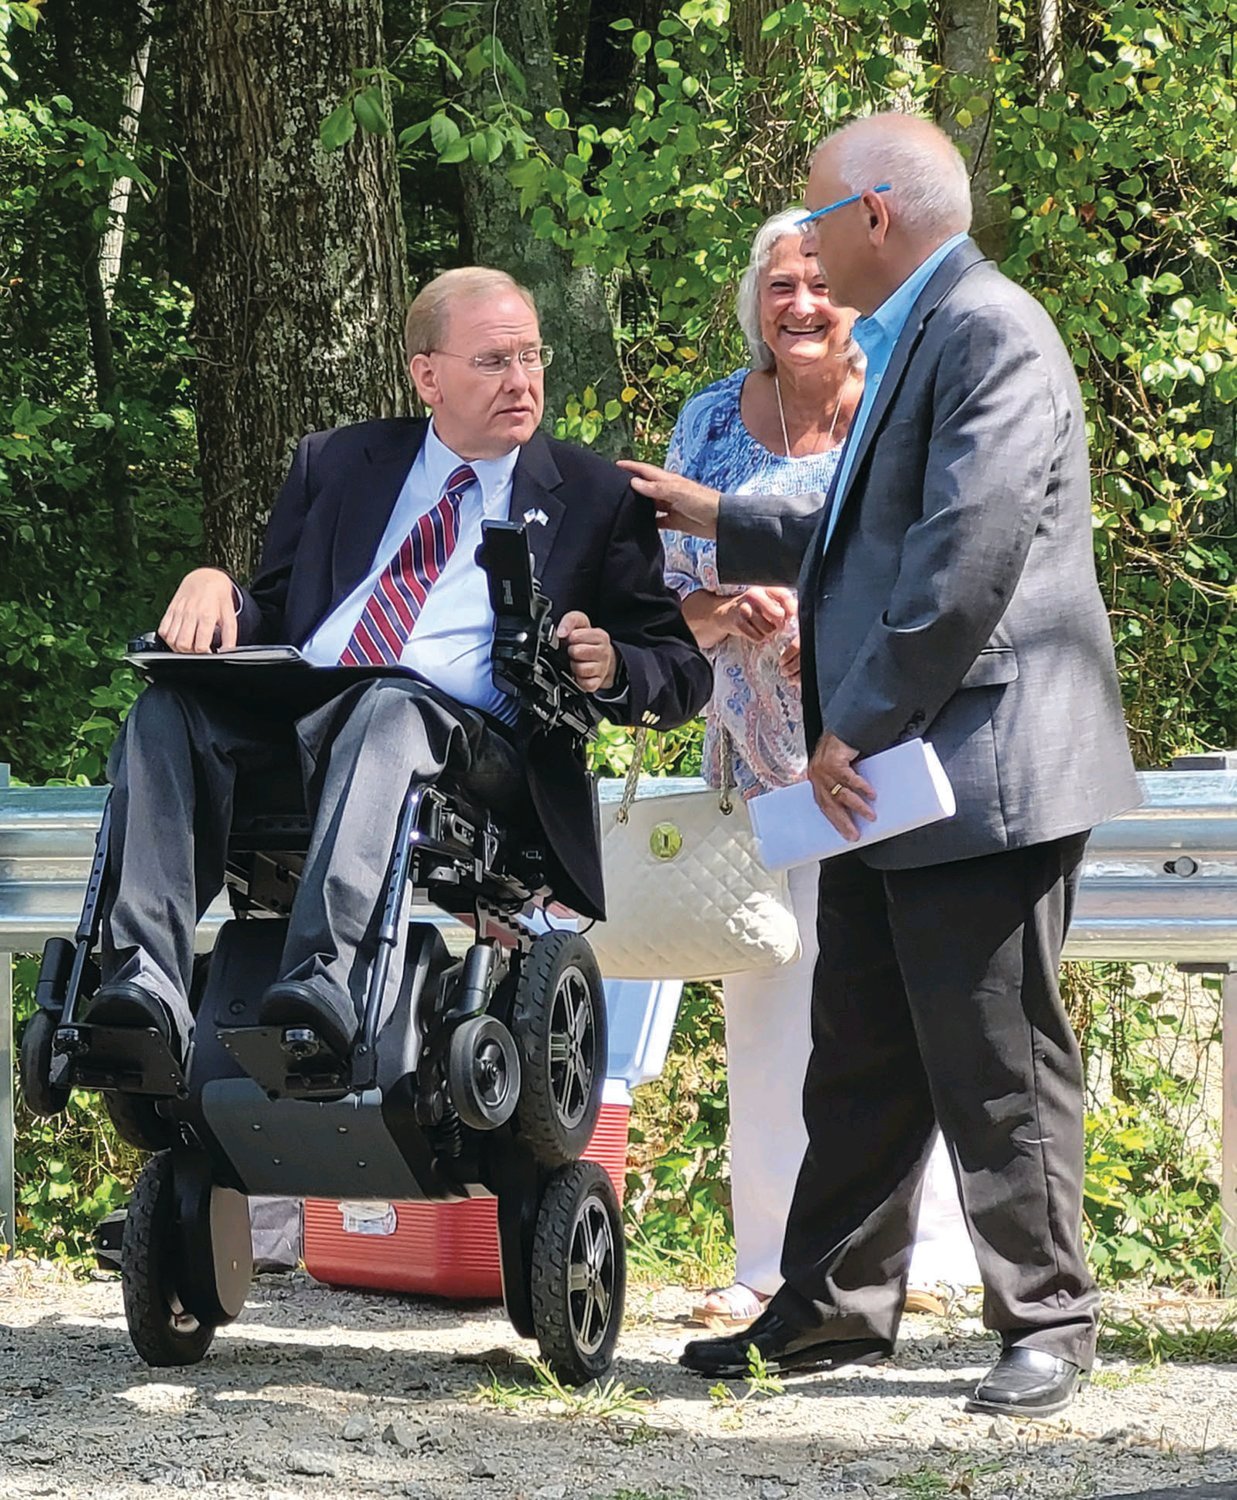 LOCAL & FEDERAL: In August, Johnston Mayor Joseph M. Polisena shakes hands with
U.S. Rep. James Langevin at an event on Belfield Drive touting floodplain improvements
in Johnston, aided by the USDA, in a cooperative effort with town and state officials.